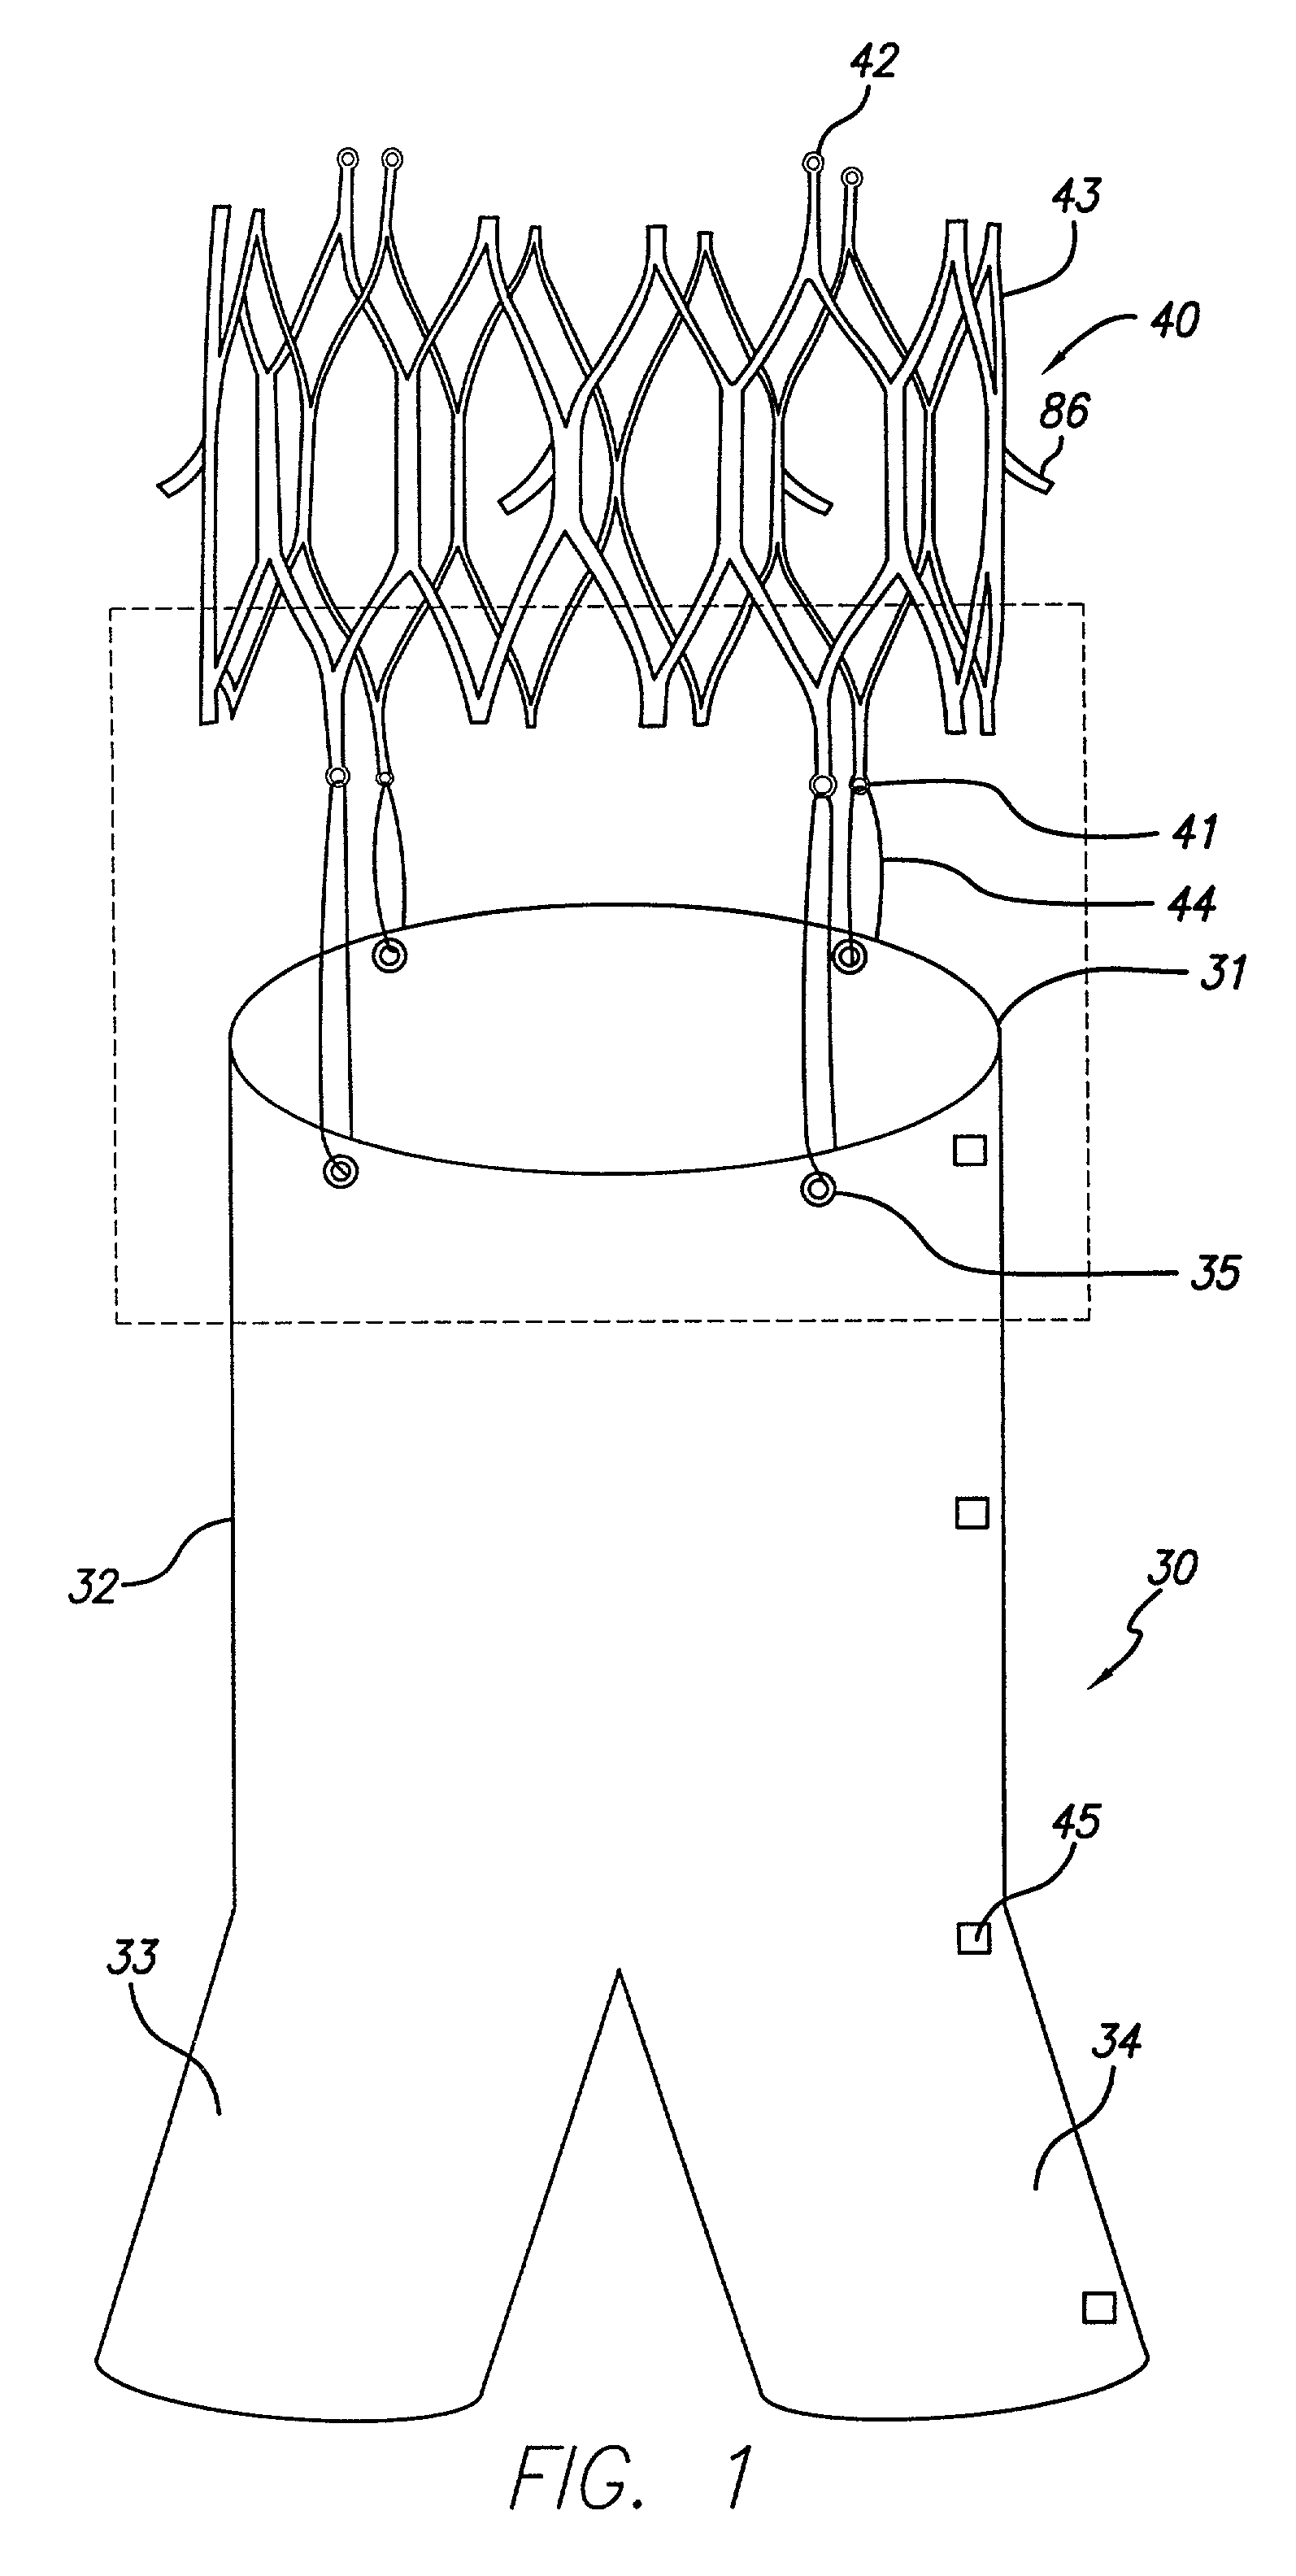 Endovascular graft device and methods for attaching components thereof